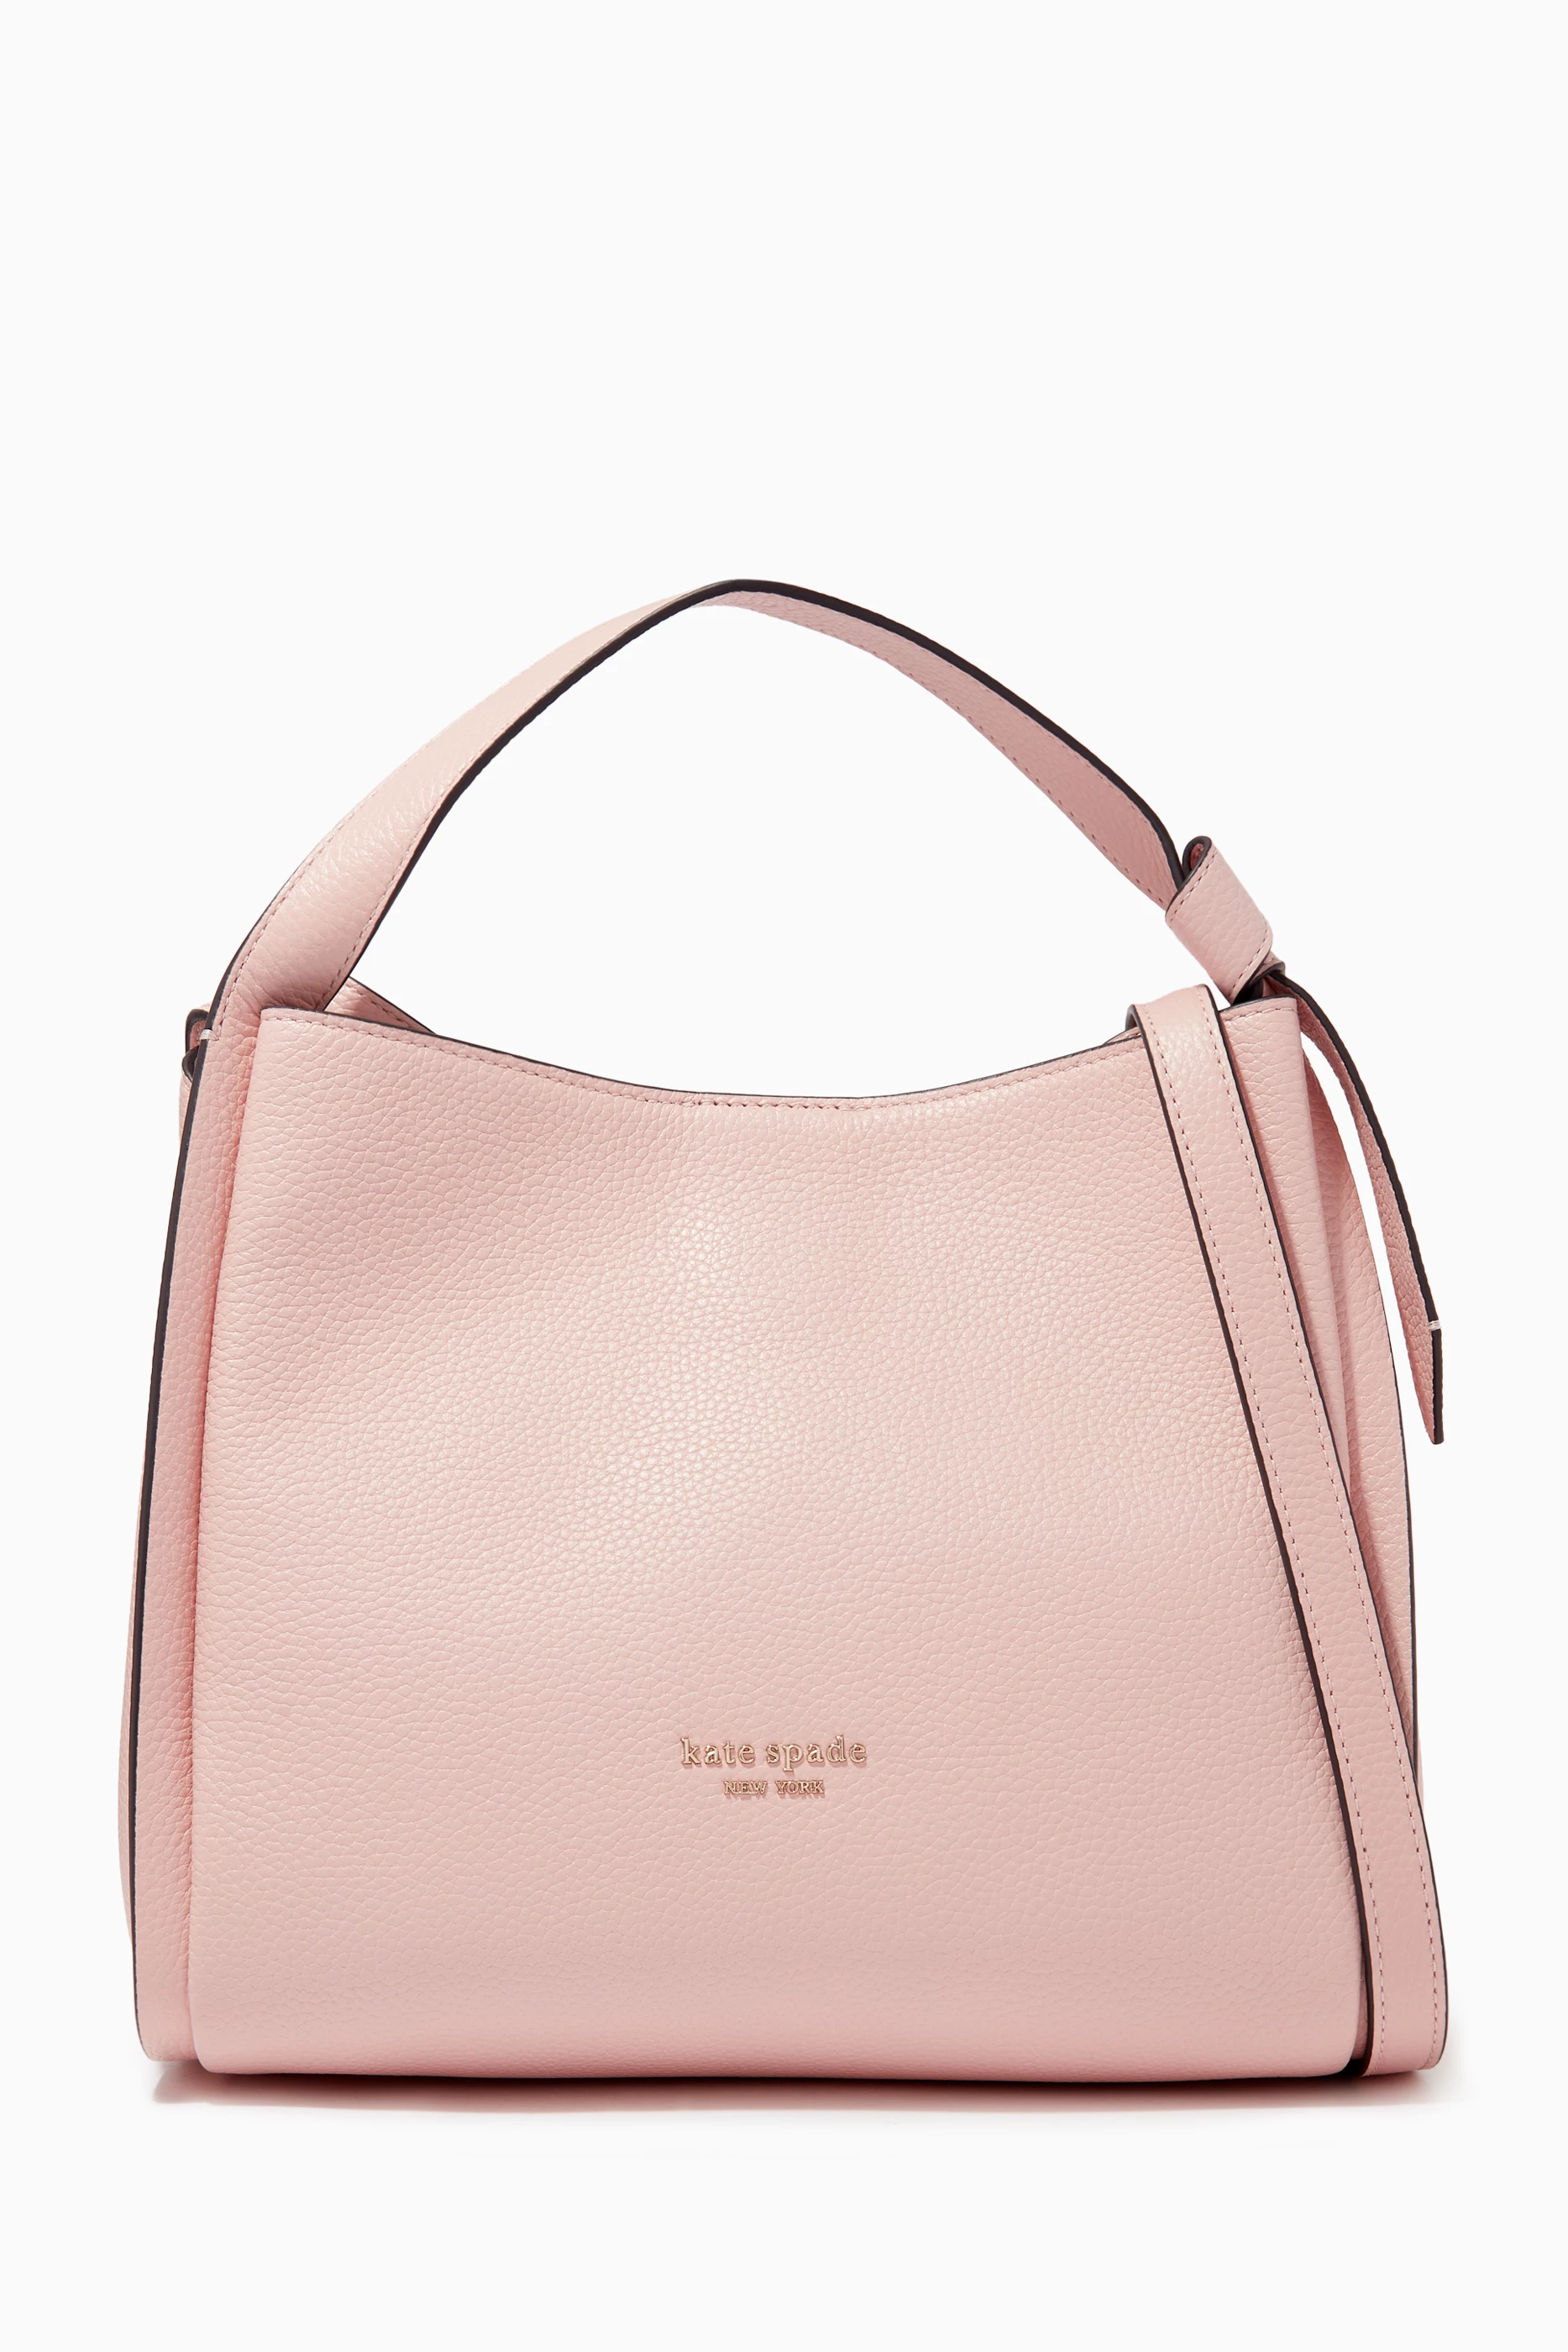 Kate Spade Knott Leather Large Tote Orchid PXR00451 Pink NWT -  Israel